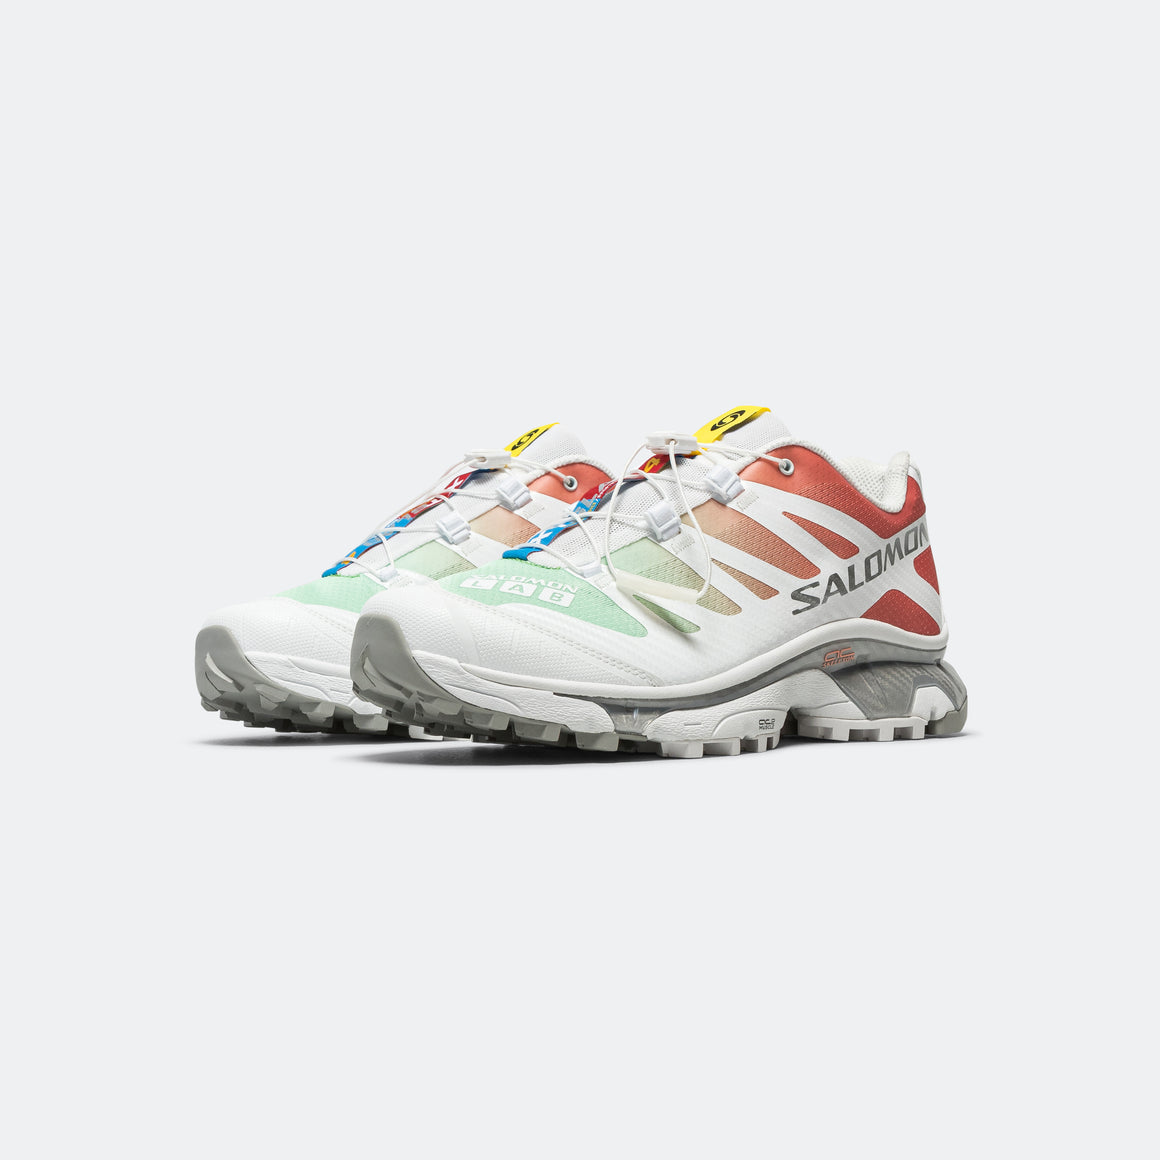 Salomon - XT-4 OG - White/Green Ash/Coral - UP THERE